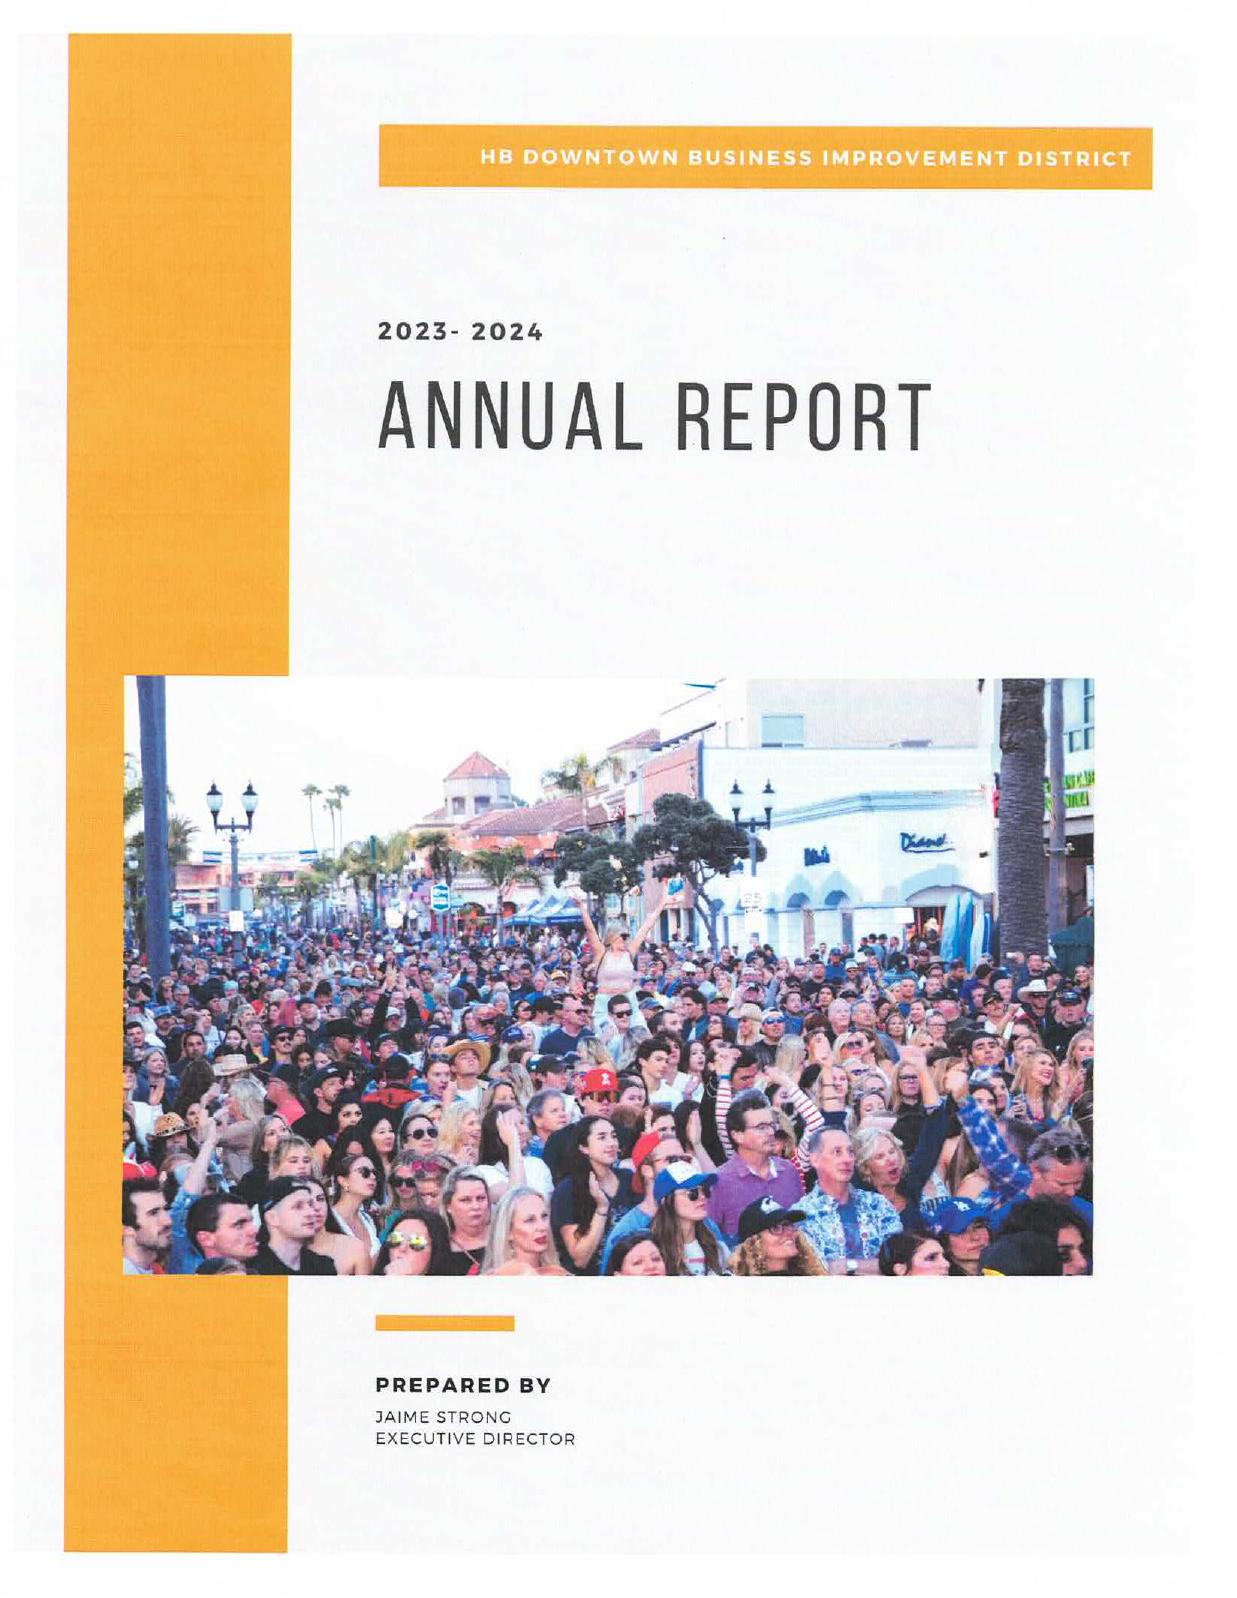 HBDOWNTOWN 2024 Annual Report